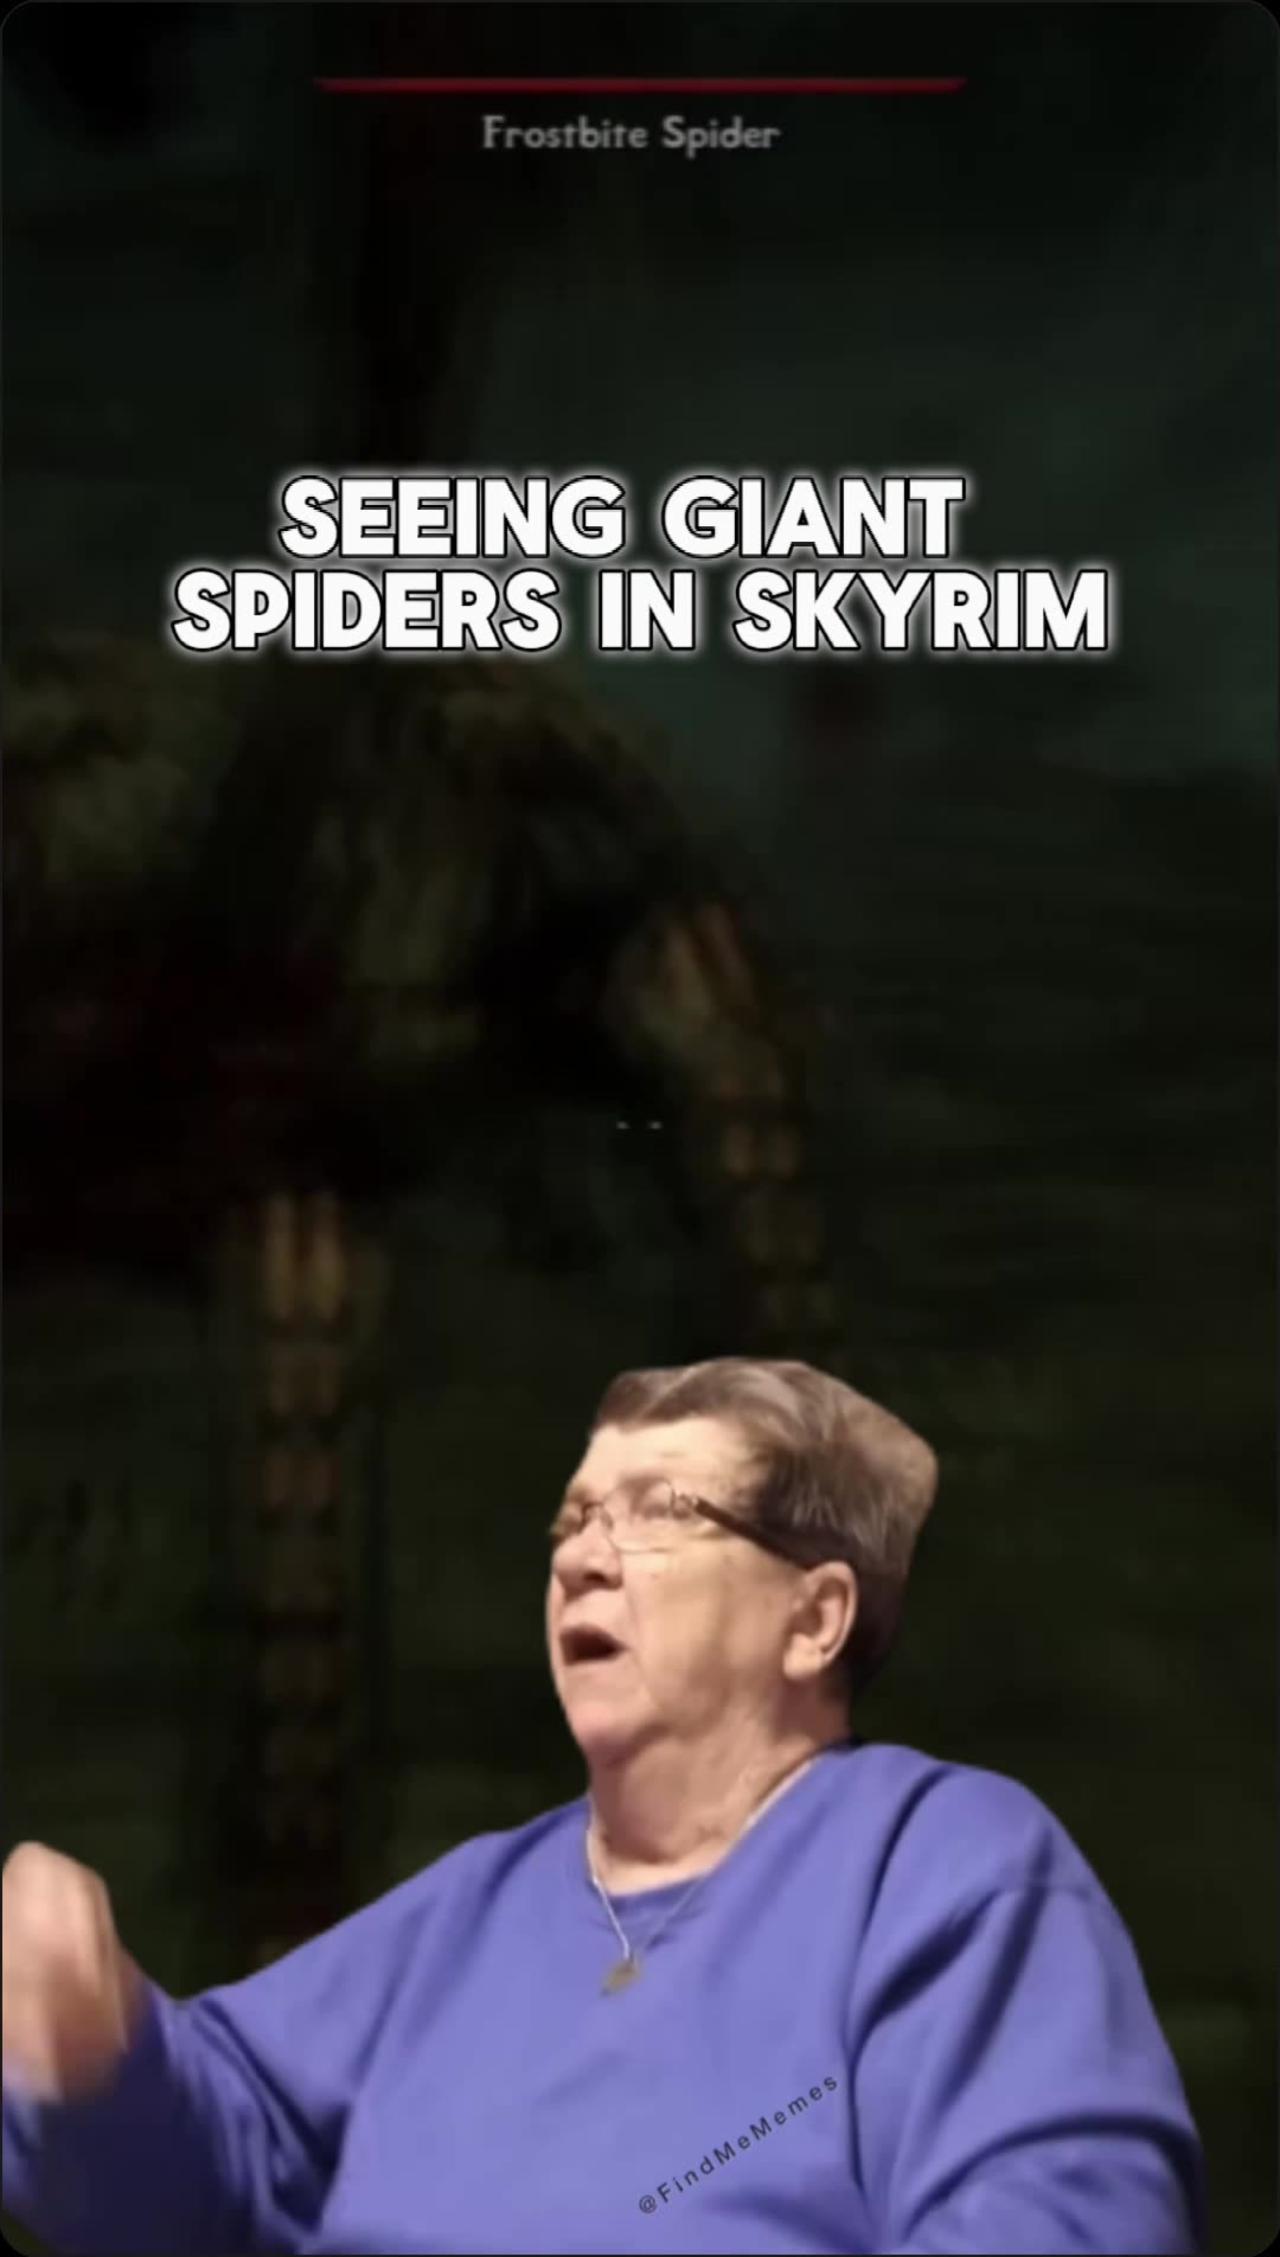 Seeing giant spiders in Skyrim